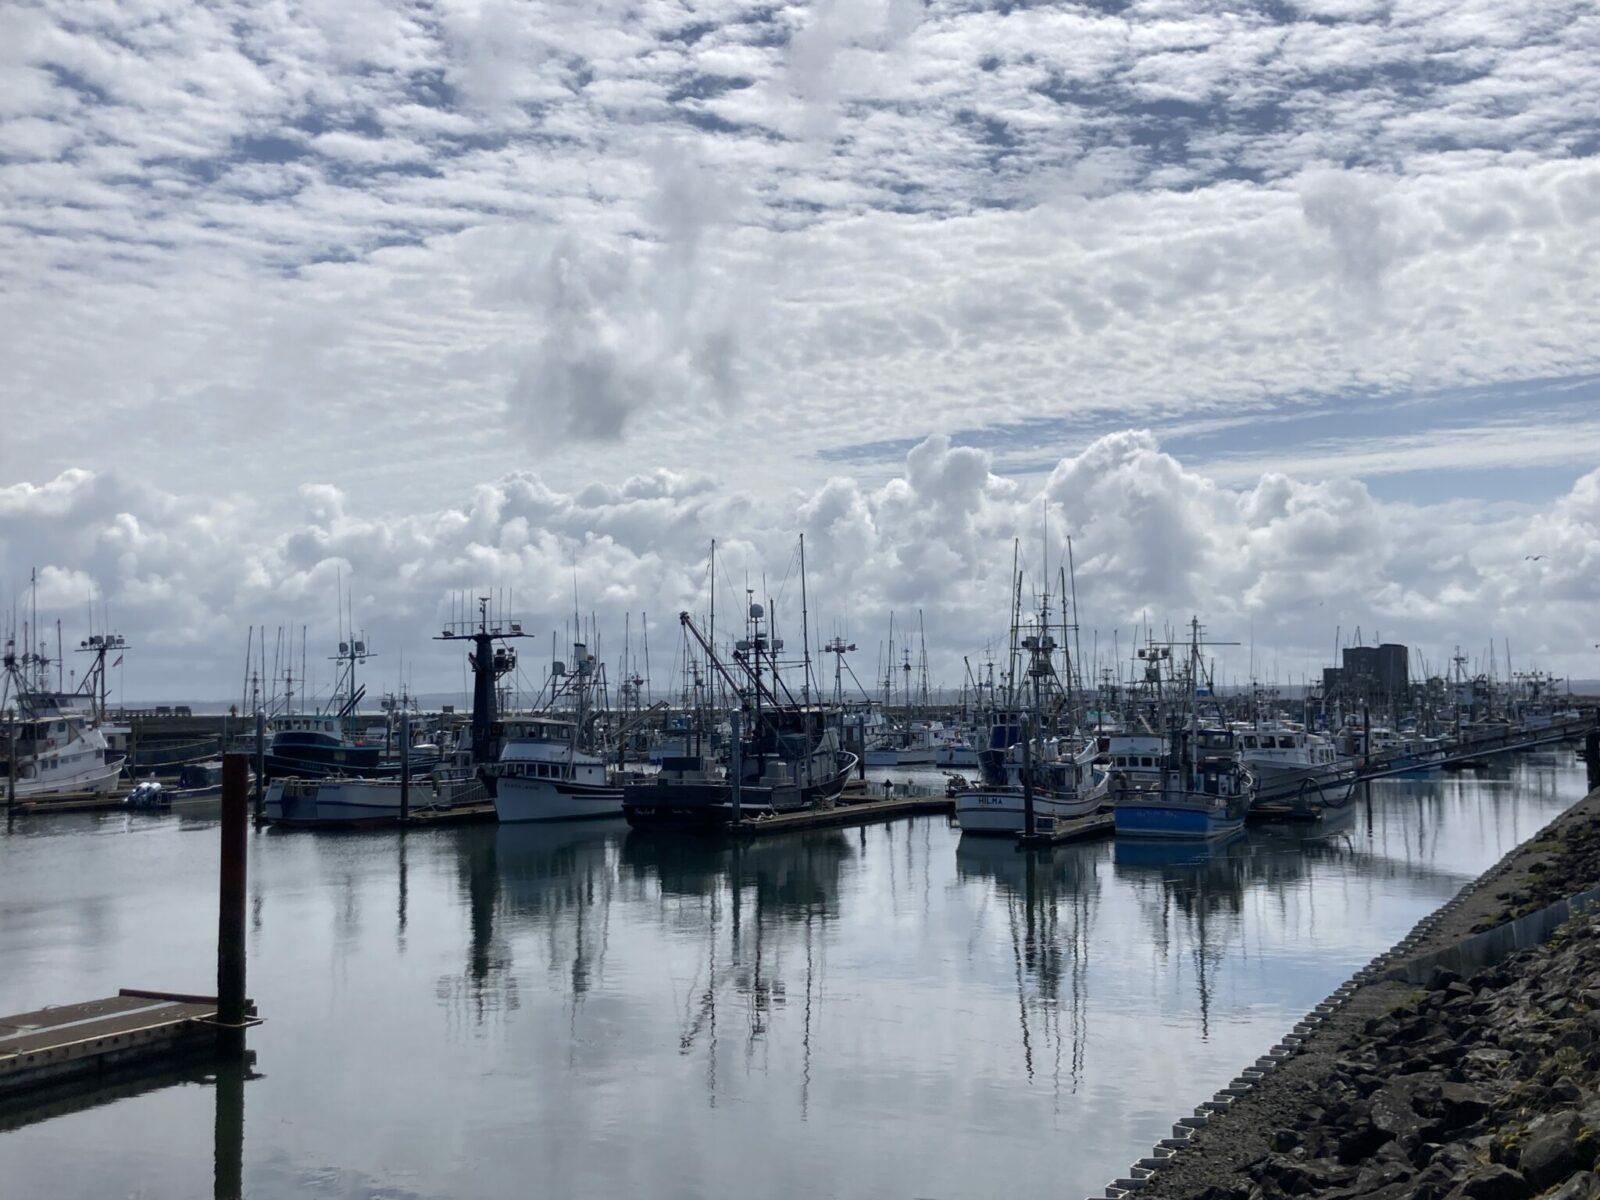 A marina full of commercial fishing boats and charter fishing boats on a partly sunny day